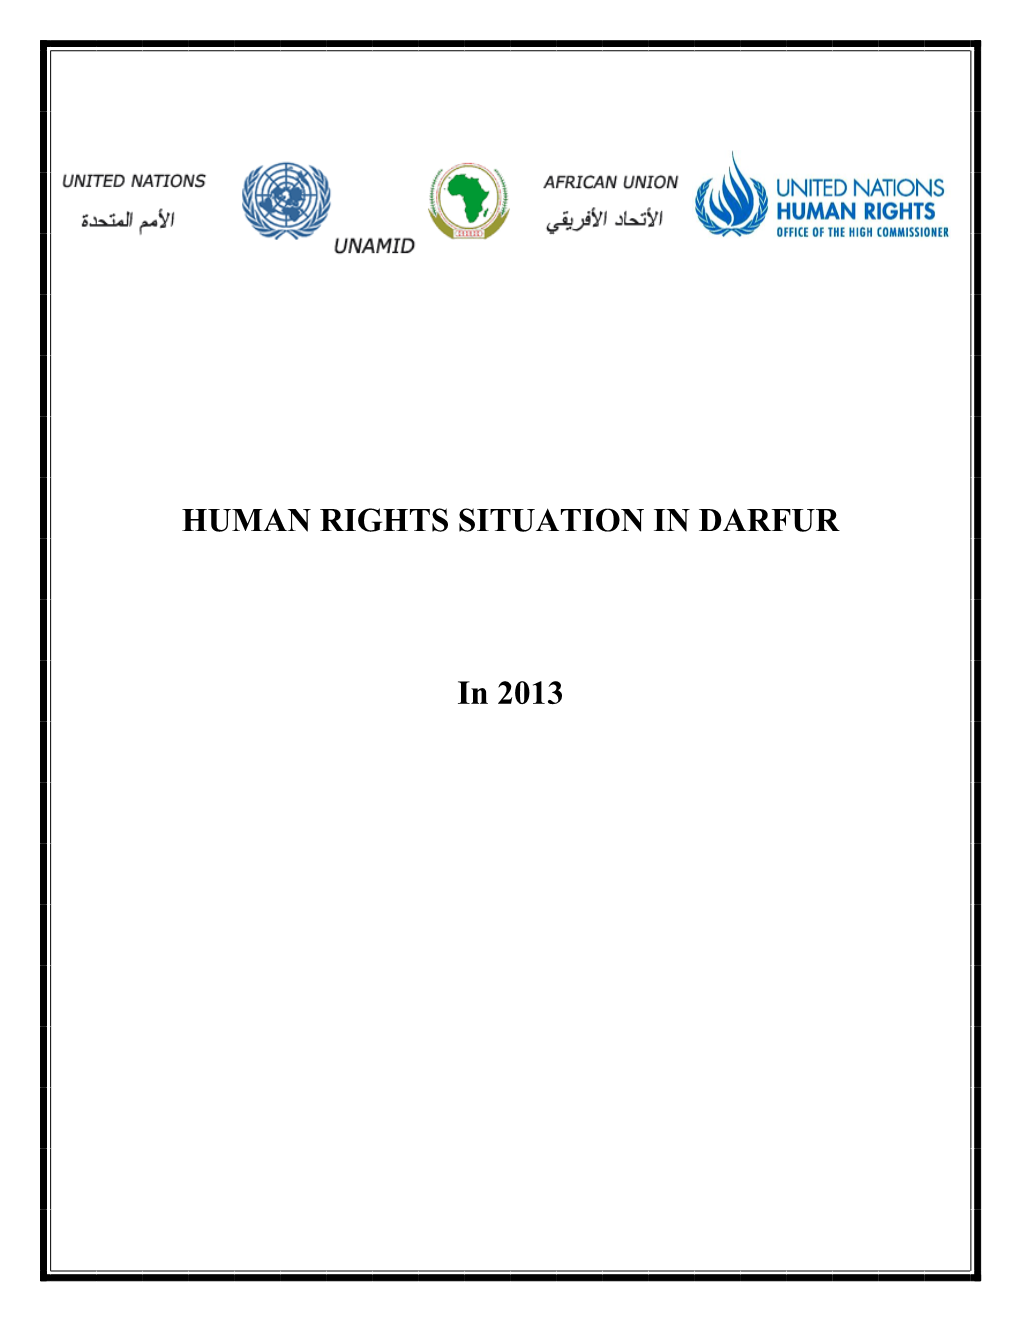 Human Rights Situation in Darfur in 2013, on the Basis of the Monitoring Work Carried out by the UNAMID Human Rights Section in All Five States of Darfur